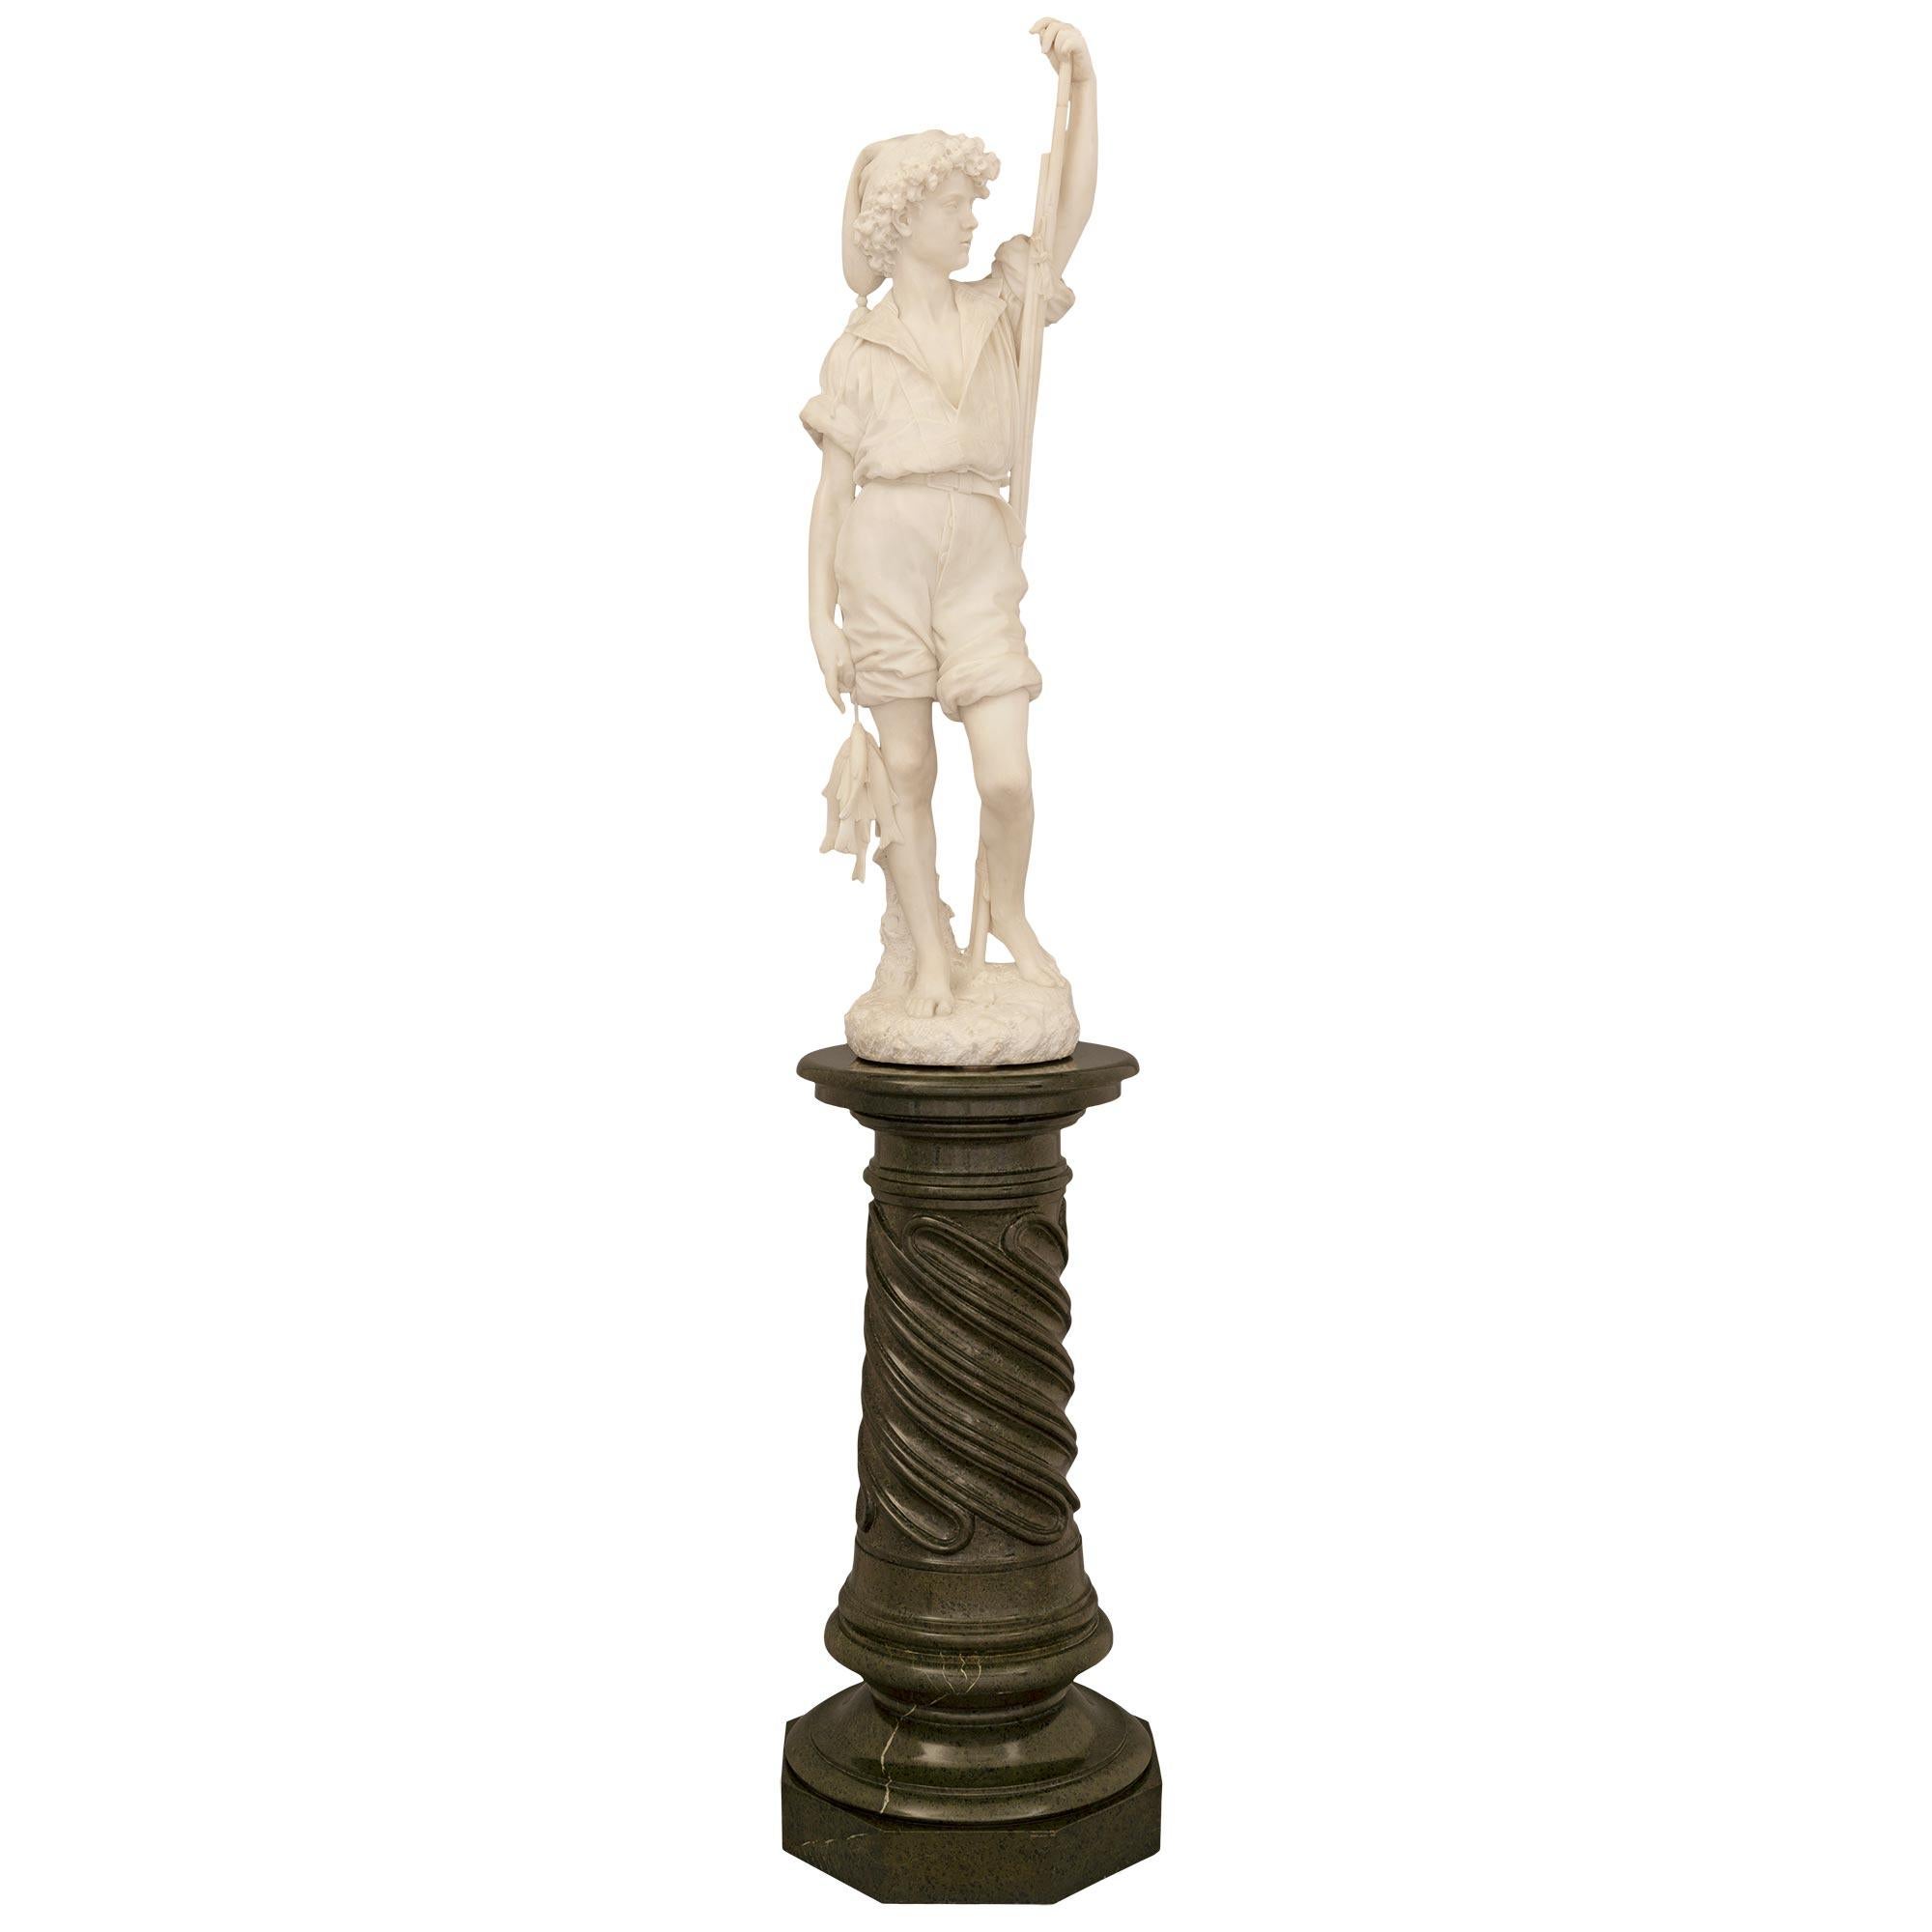 A stunning and extremely high quality Italian 19th century white Carrara marble statue of a Neapolitan fisher boy on a Vert de Patricia marble pedestal. The statue is raised on a most handsome Vert de Patricia marble pedestal with a fine octagonal